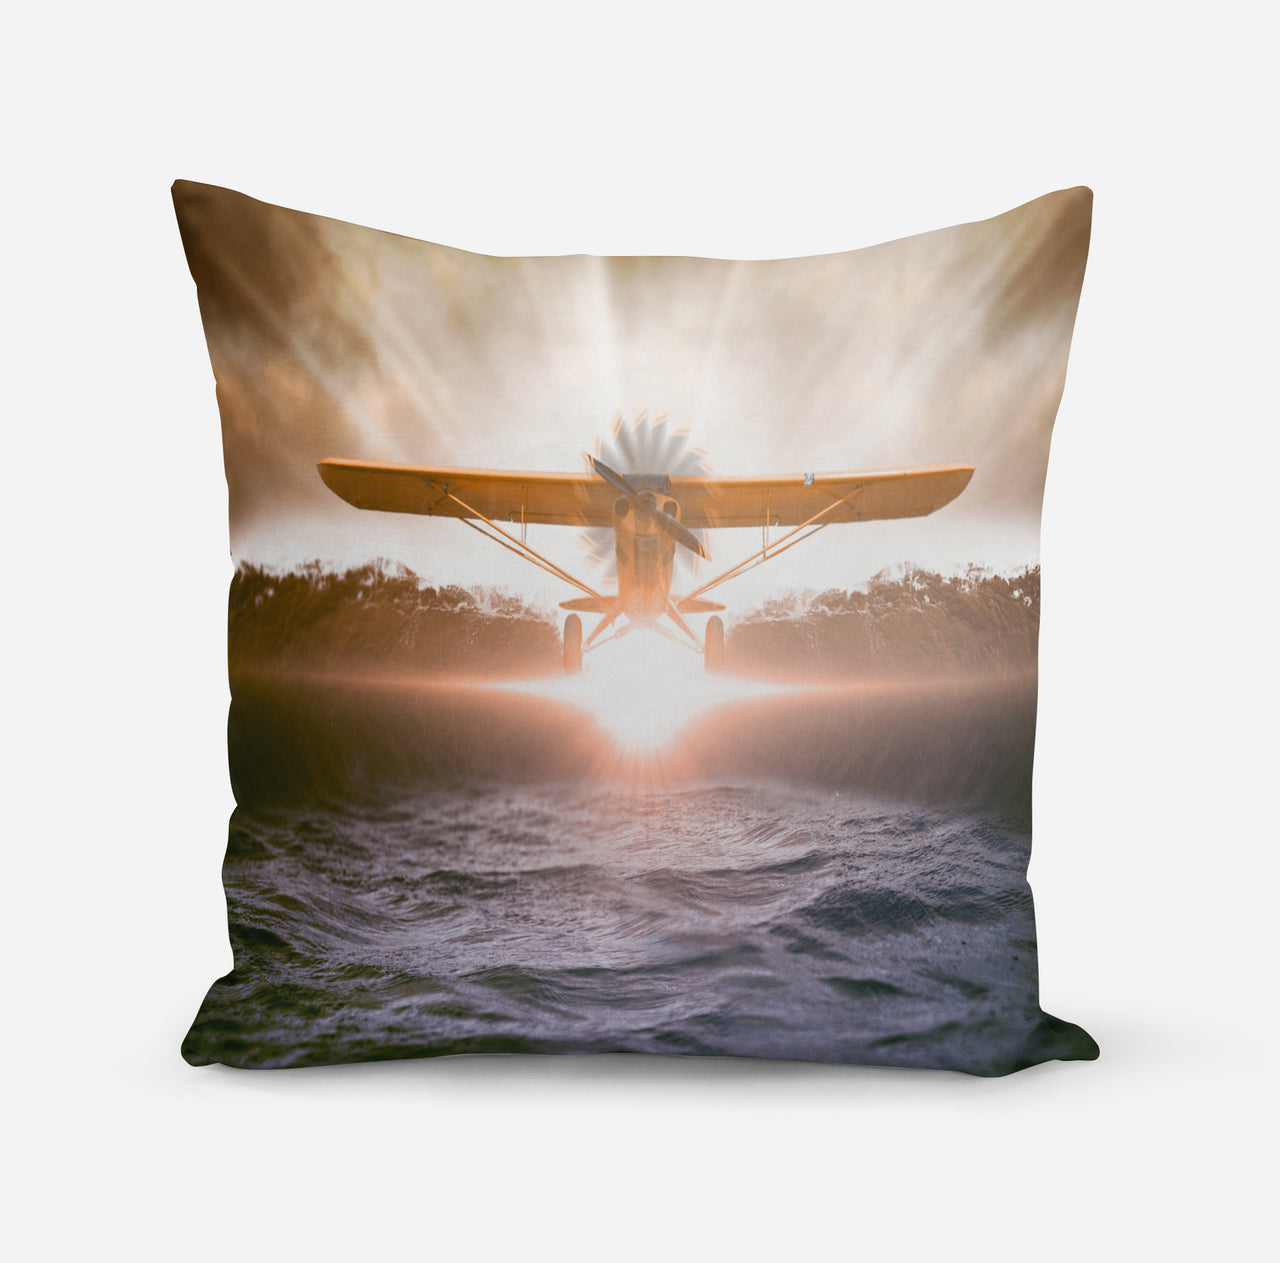 Graphical Propeller Designed Pillows